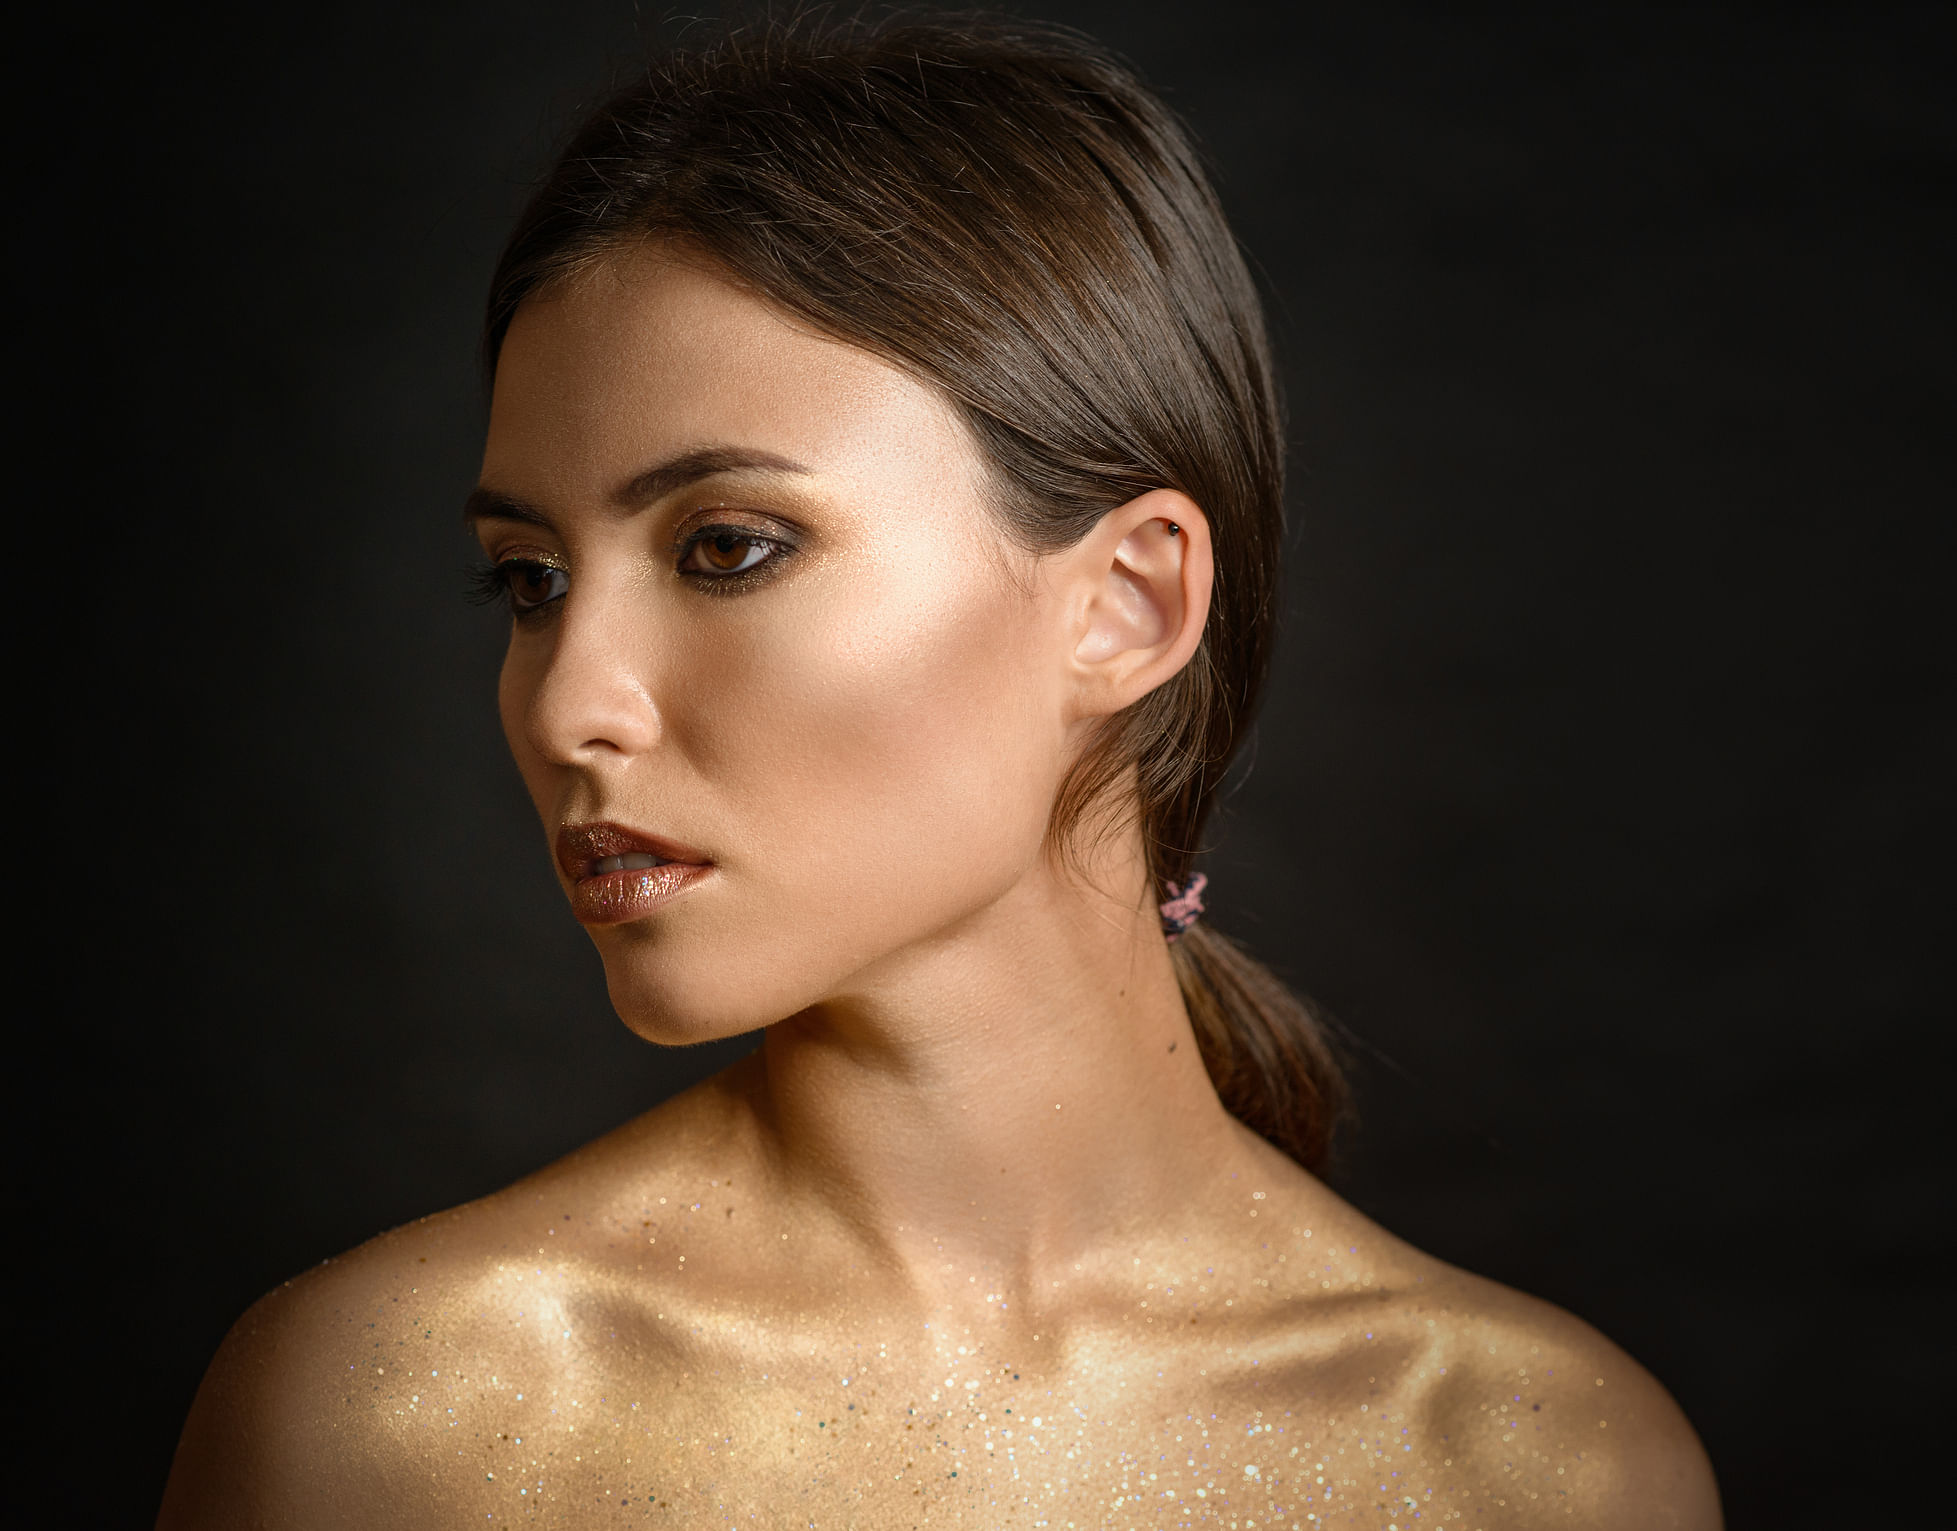 Photo Courtesy:<a href="https://www.istockphoto.com/in/photo/woman-with-golden-makeup-gm848662558-139240493"> istockphotos</a>